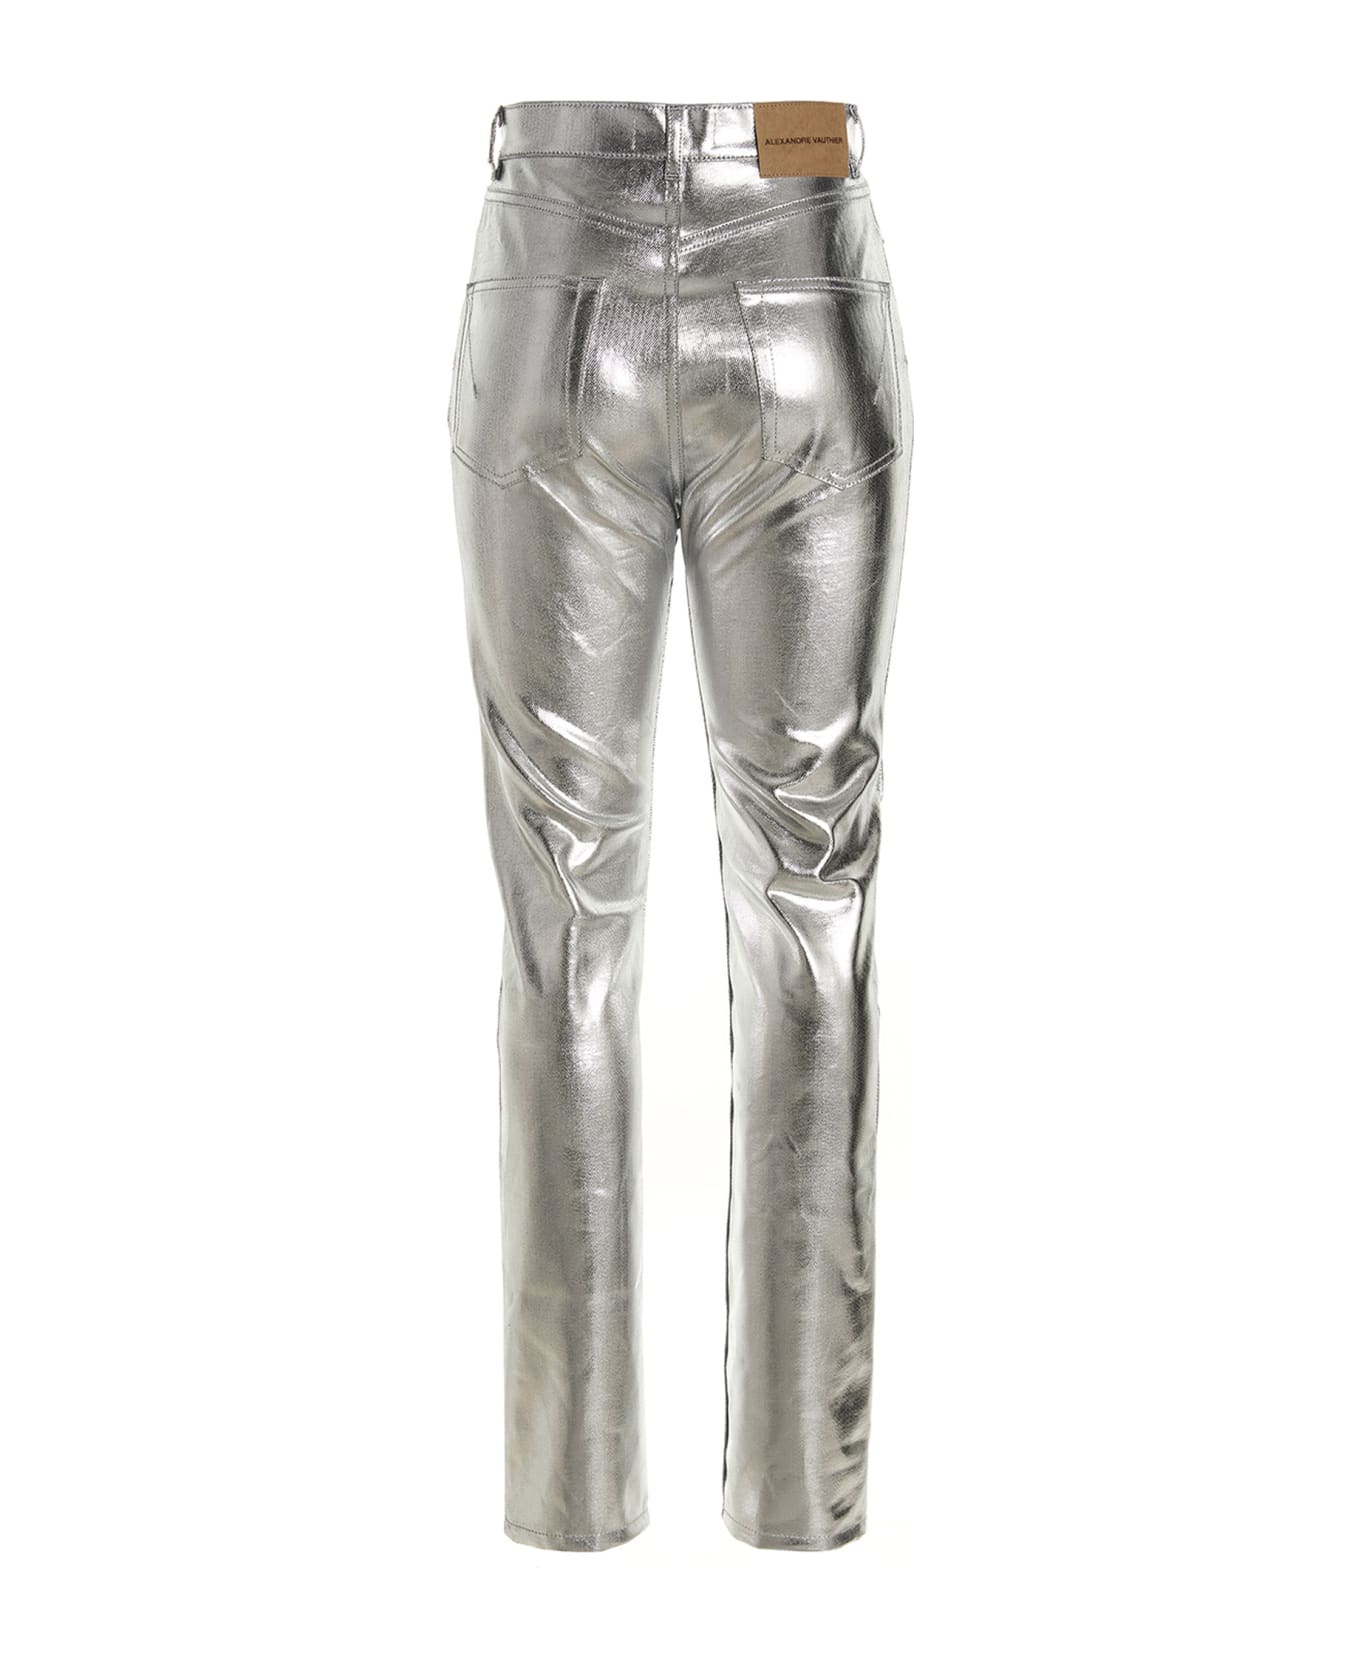 Alexandre Vauthier Coated Jeans - Silver